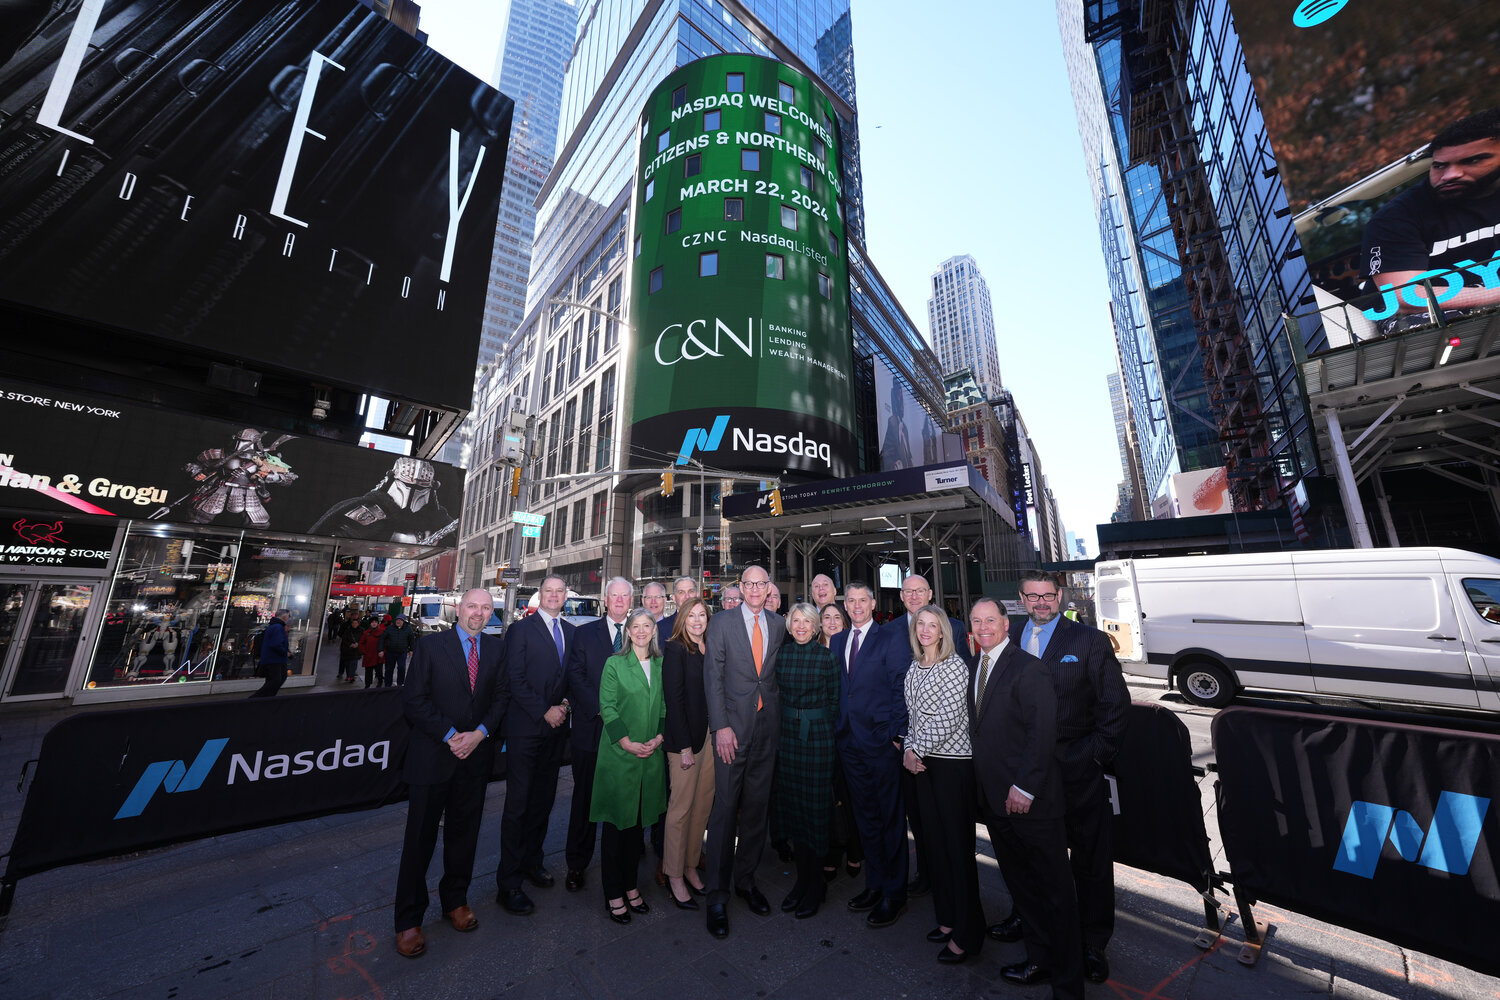 C&N’s week-long celebration of its 160th anniversary culminated with ringing the NASDAQ opening bell March 22.